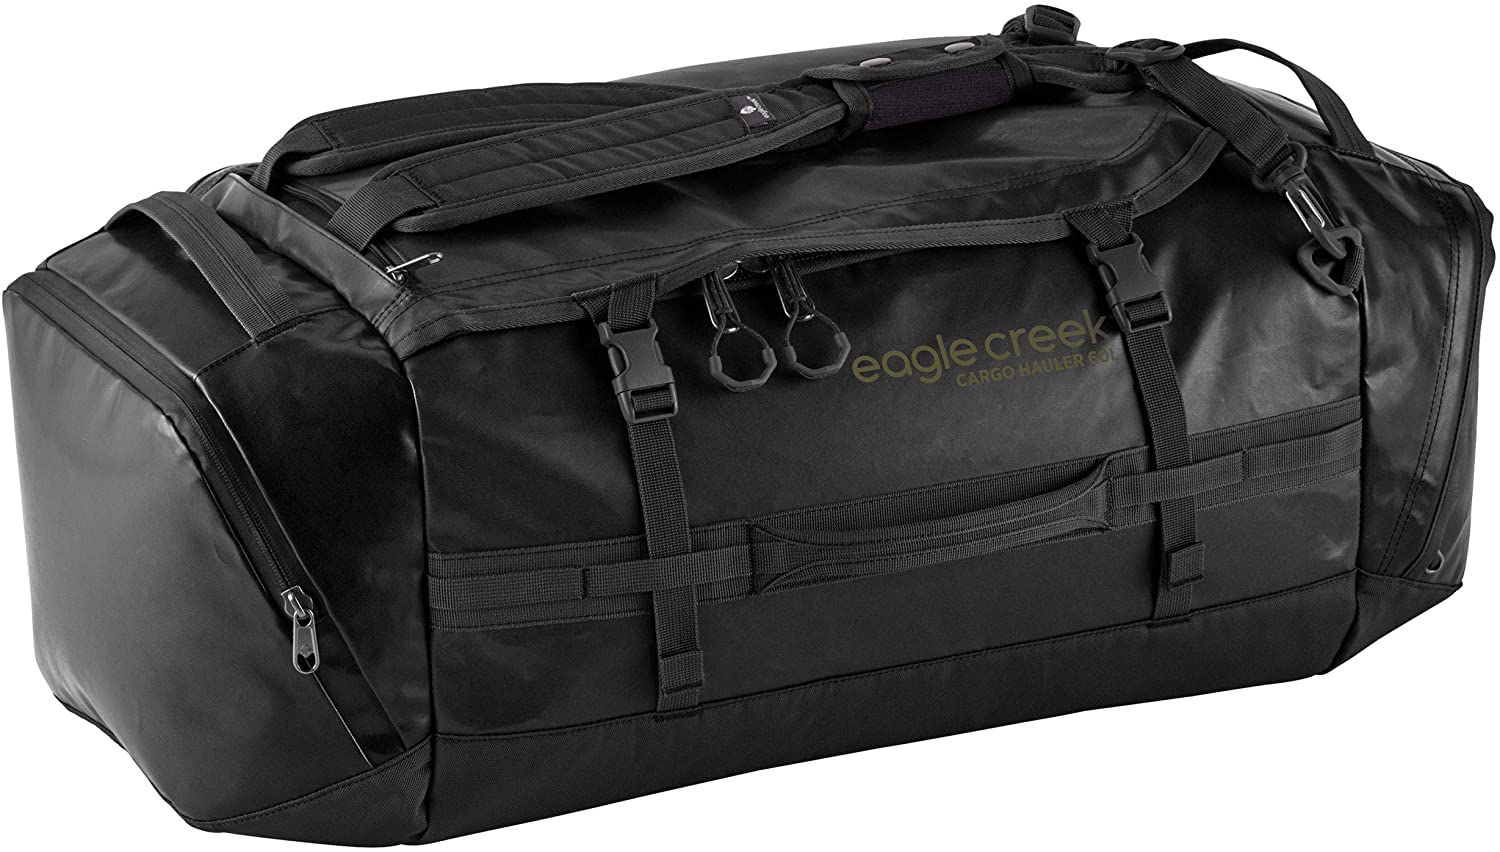 Eagle Creek Cargo Hauler Duffel 60L in Jet Black color from the front